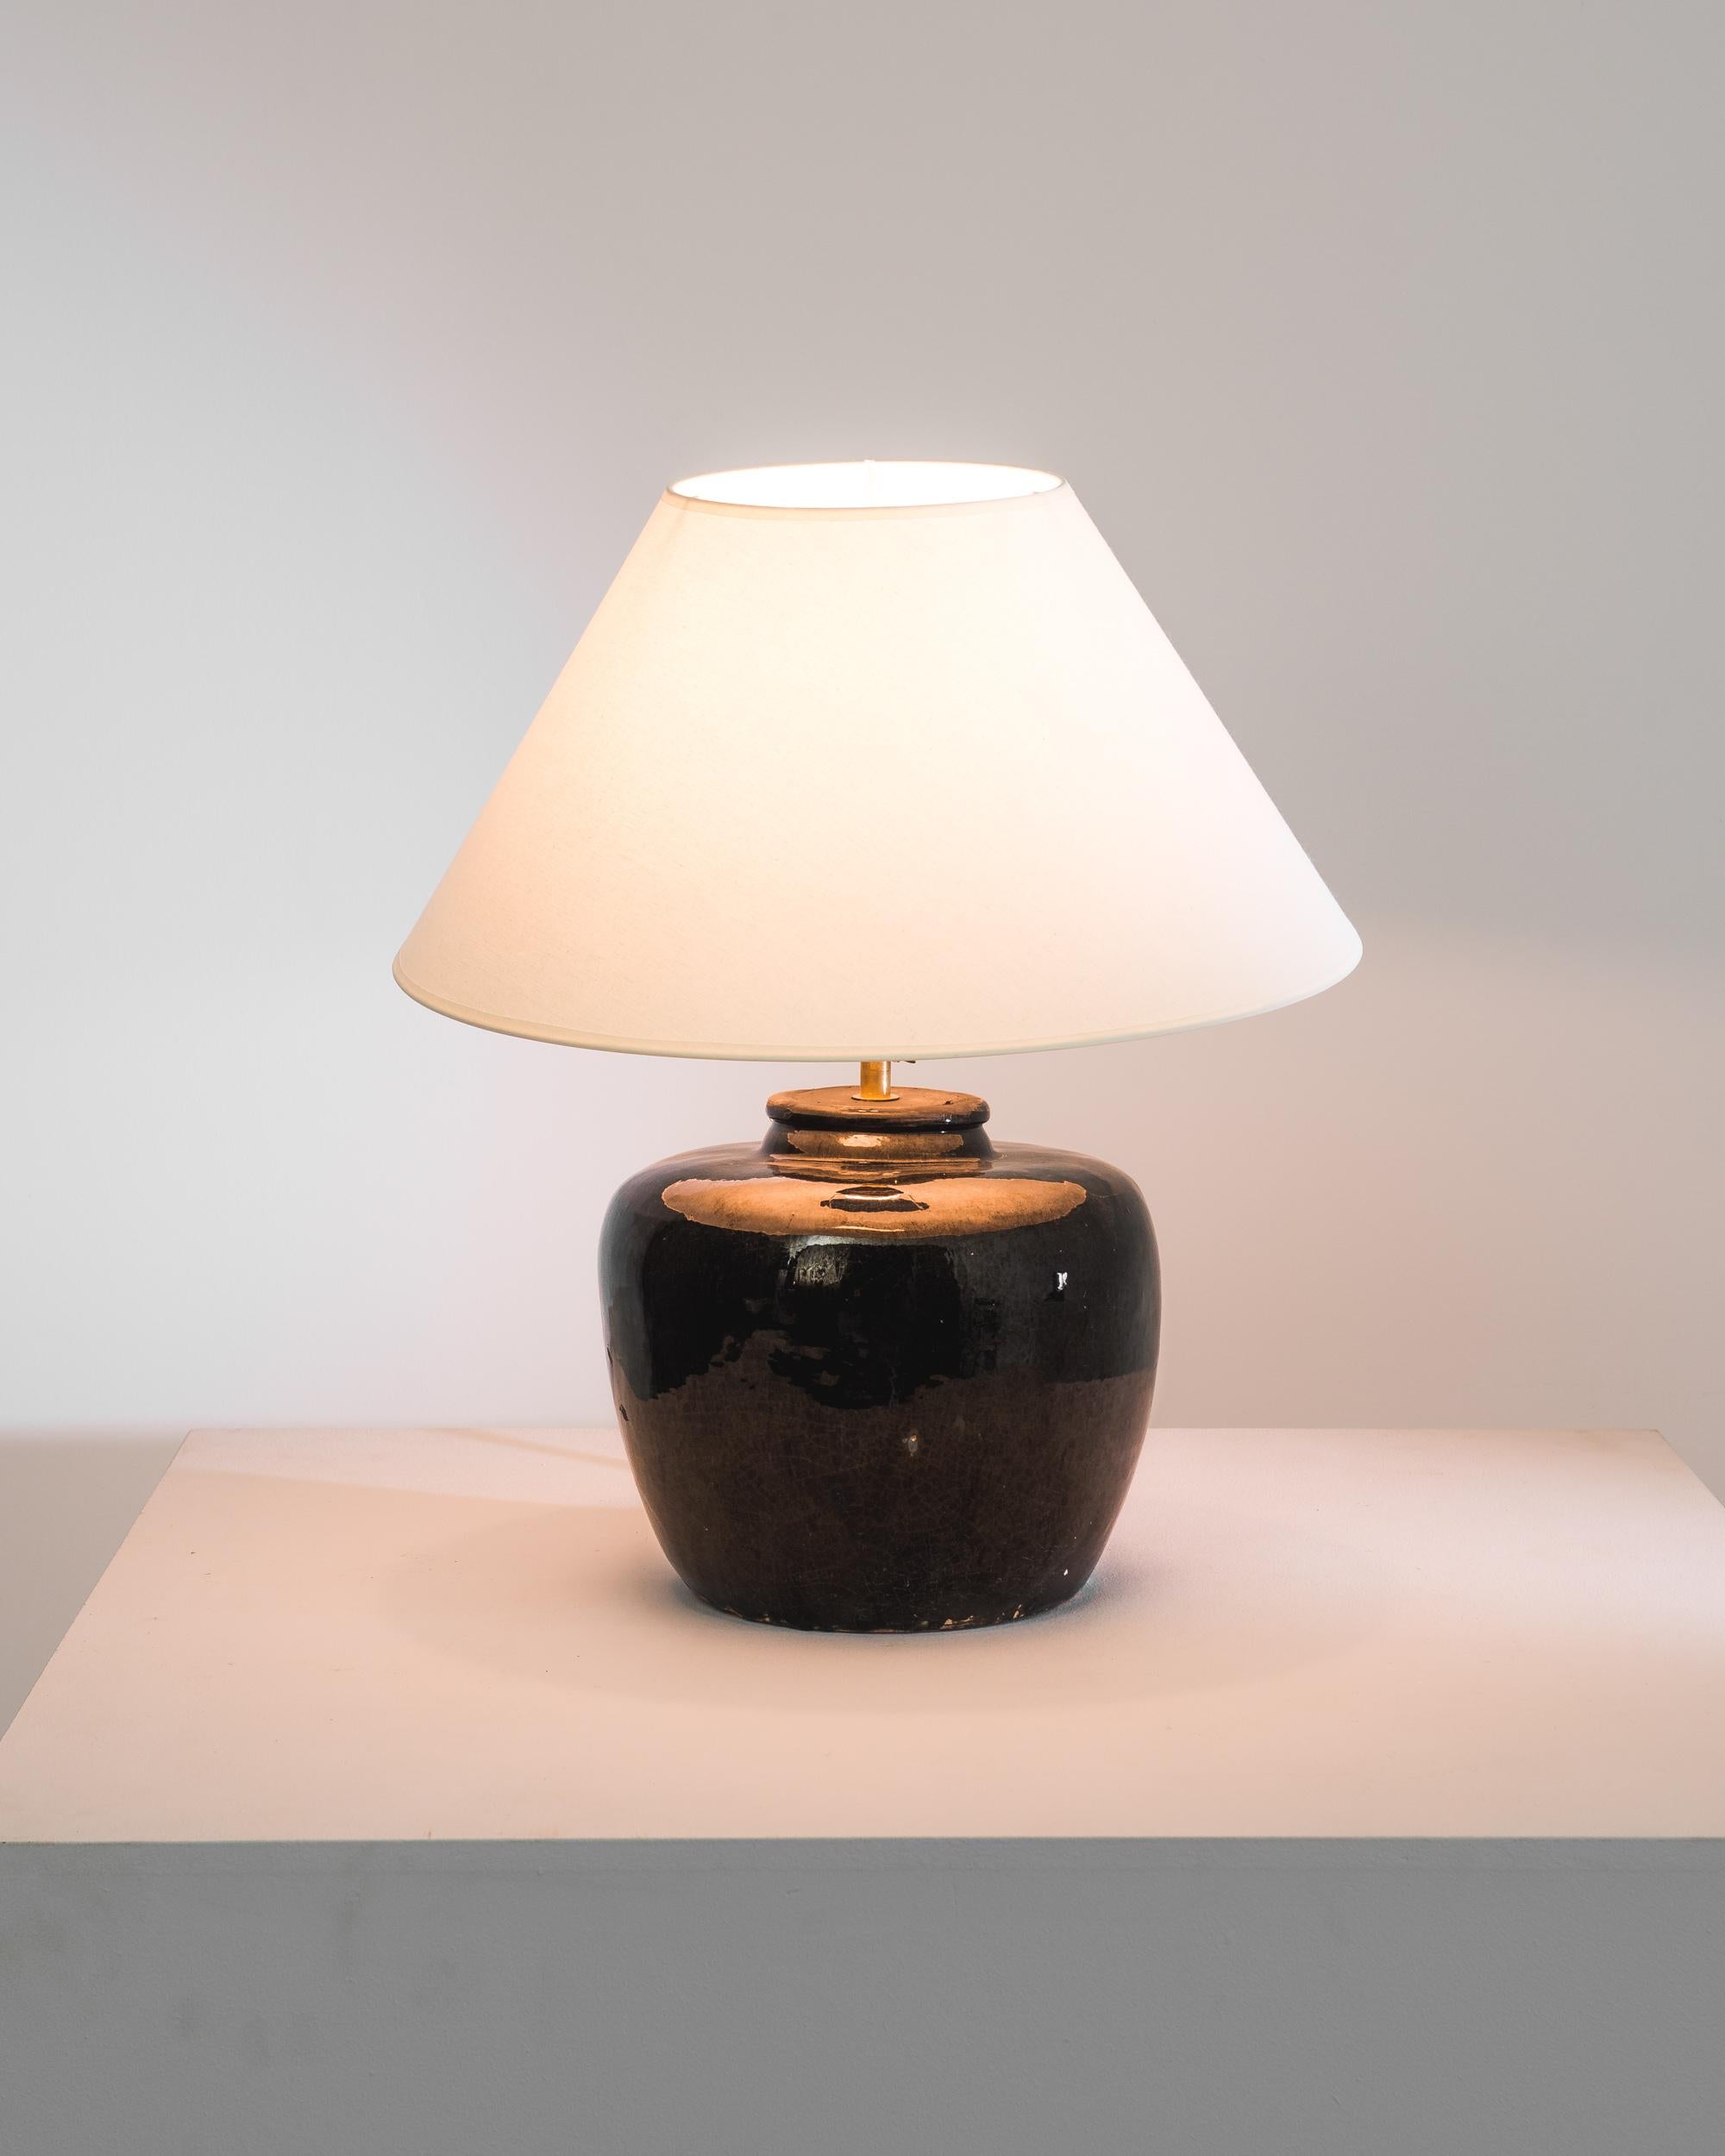 An extraordinary piece to inspire your collection. This vintage Chinese vase has been adapted into a beautiful table lamp. Polished brass meets the glossy black glaze, enlightening your space with an uncompromising contrast. The textured glazes, and